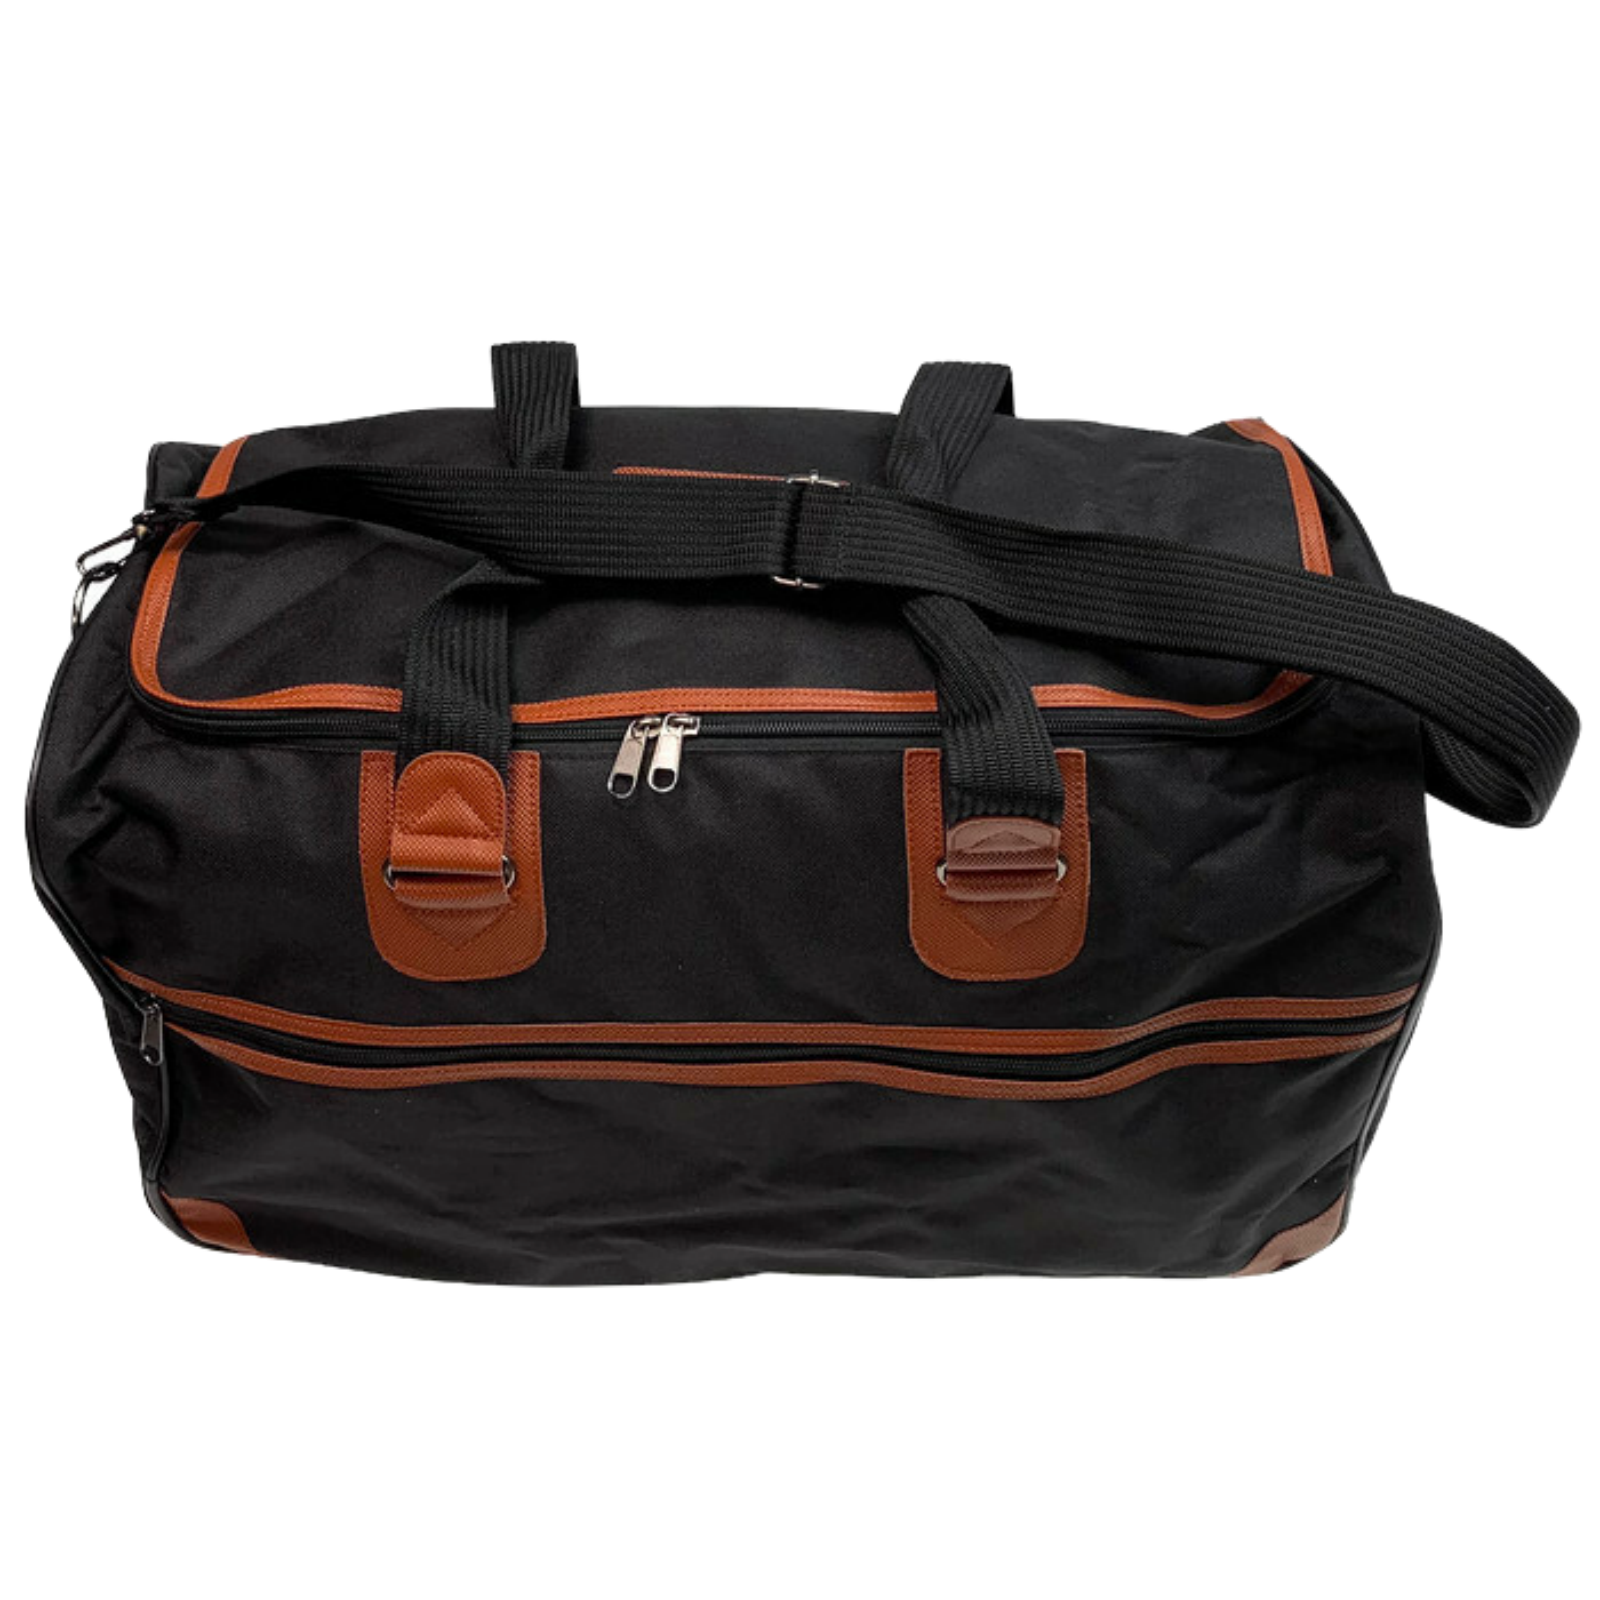 Large Duffle Bag with Wheels & Handle Travel Suitcase Sports Tote Gym Camping | Buy Duffle Bags ...